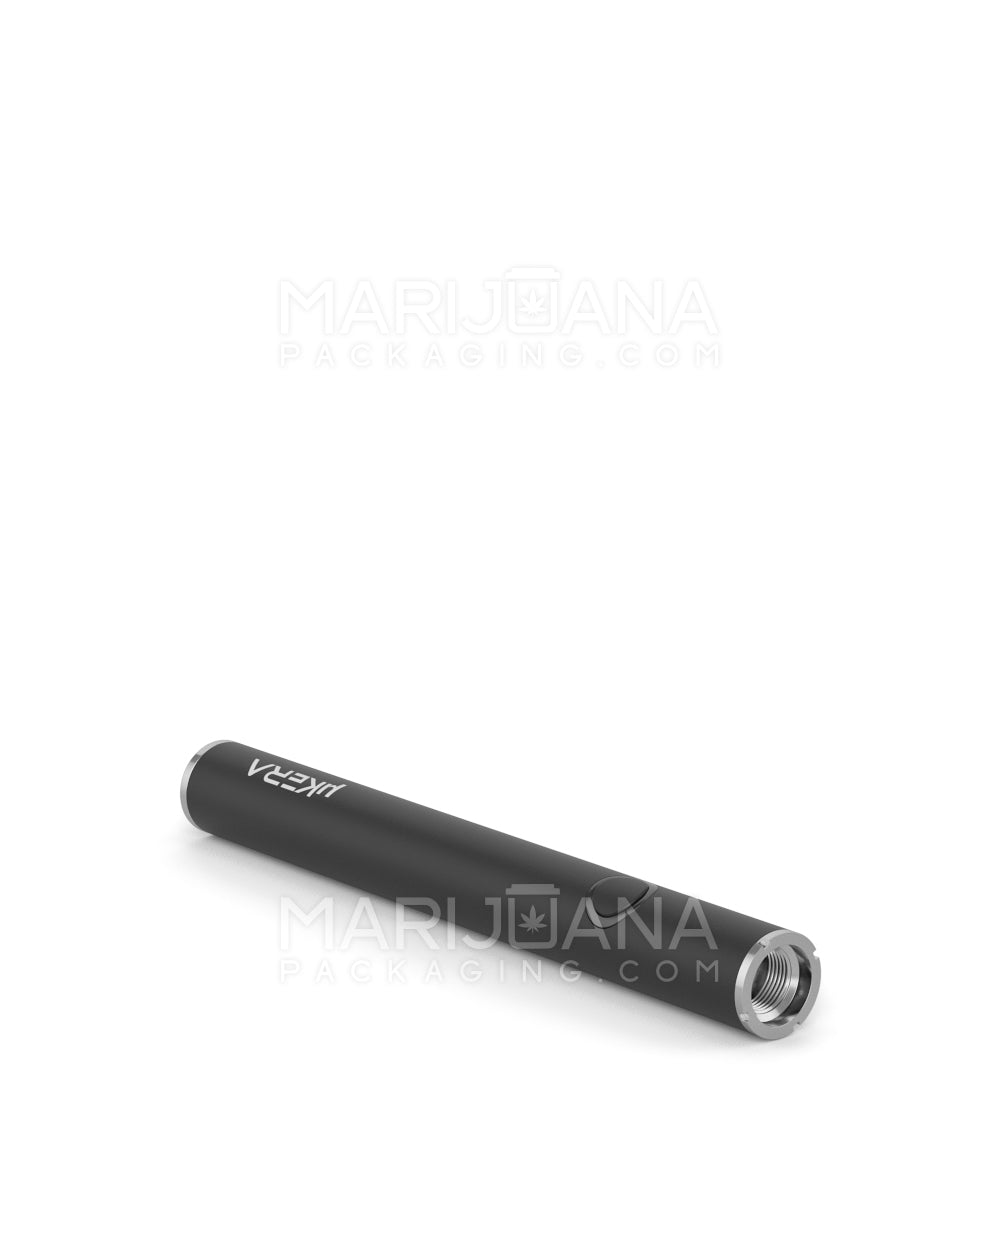 RAE | Variable Voltage Soft Touch Vape Battery | 320mAh - Black - 640 Count - 5